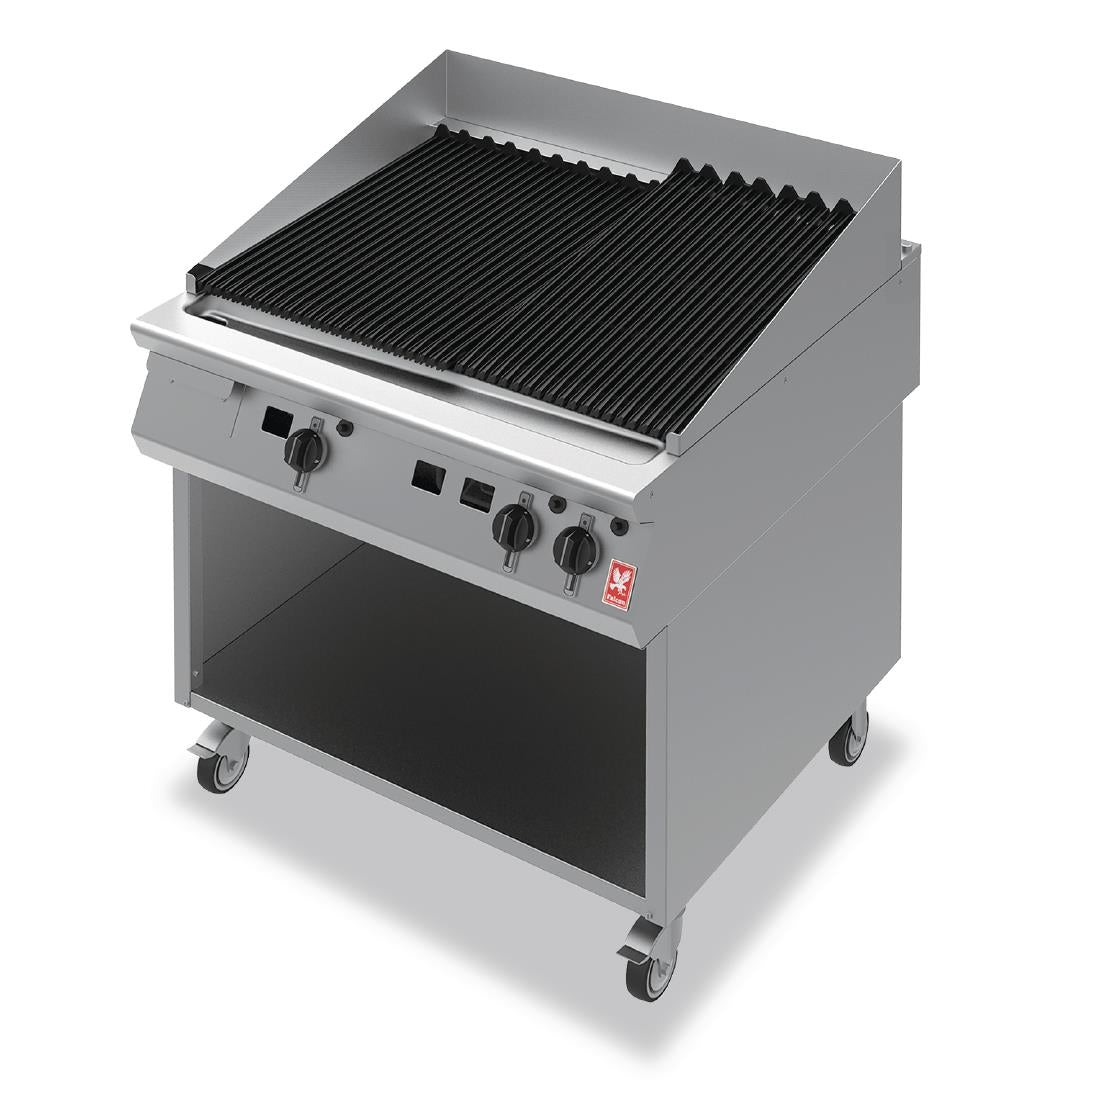 Falcon F900 Chargrill on Mobile Stand Propane Gas G9490